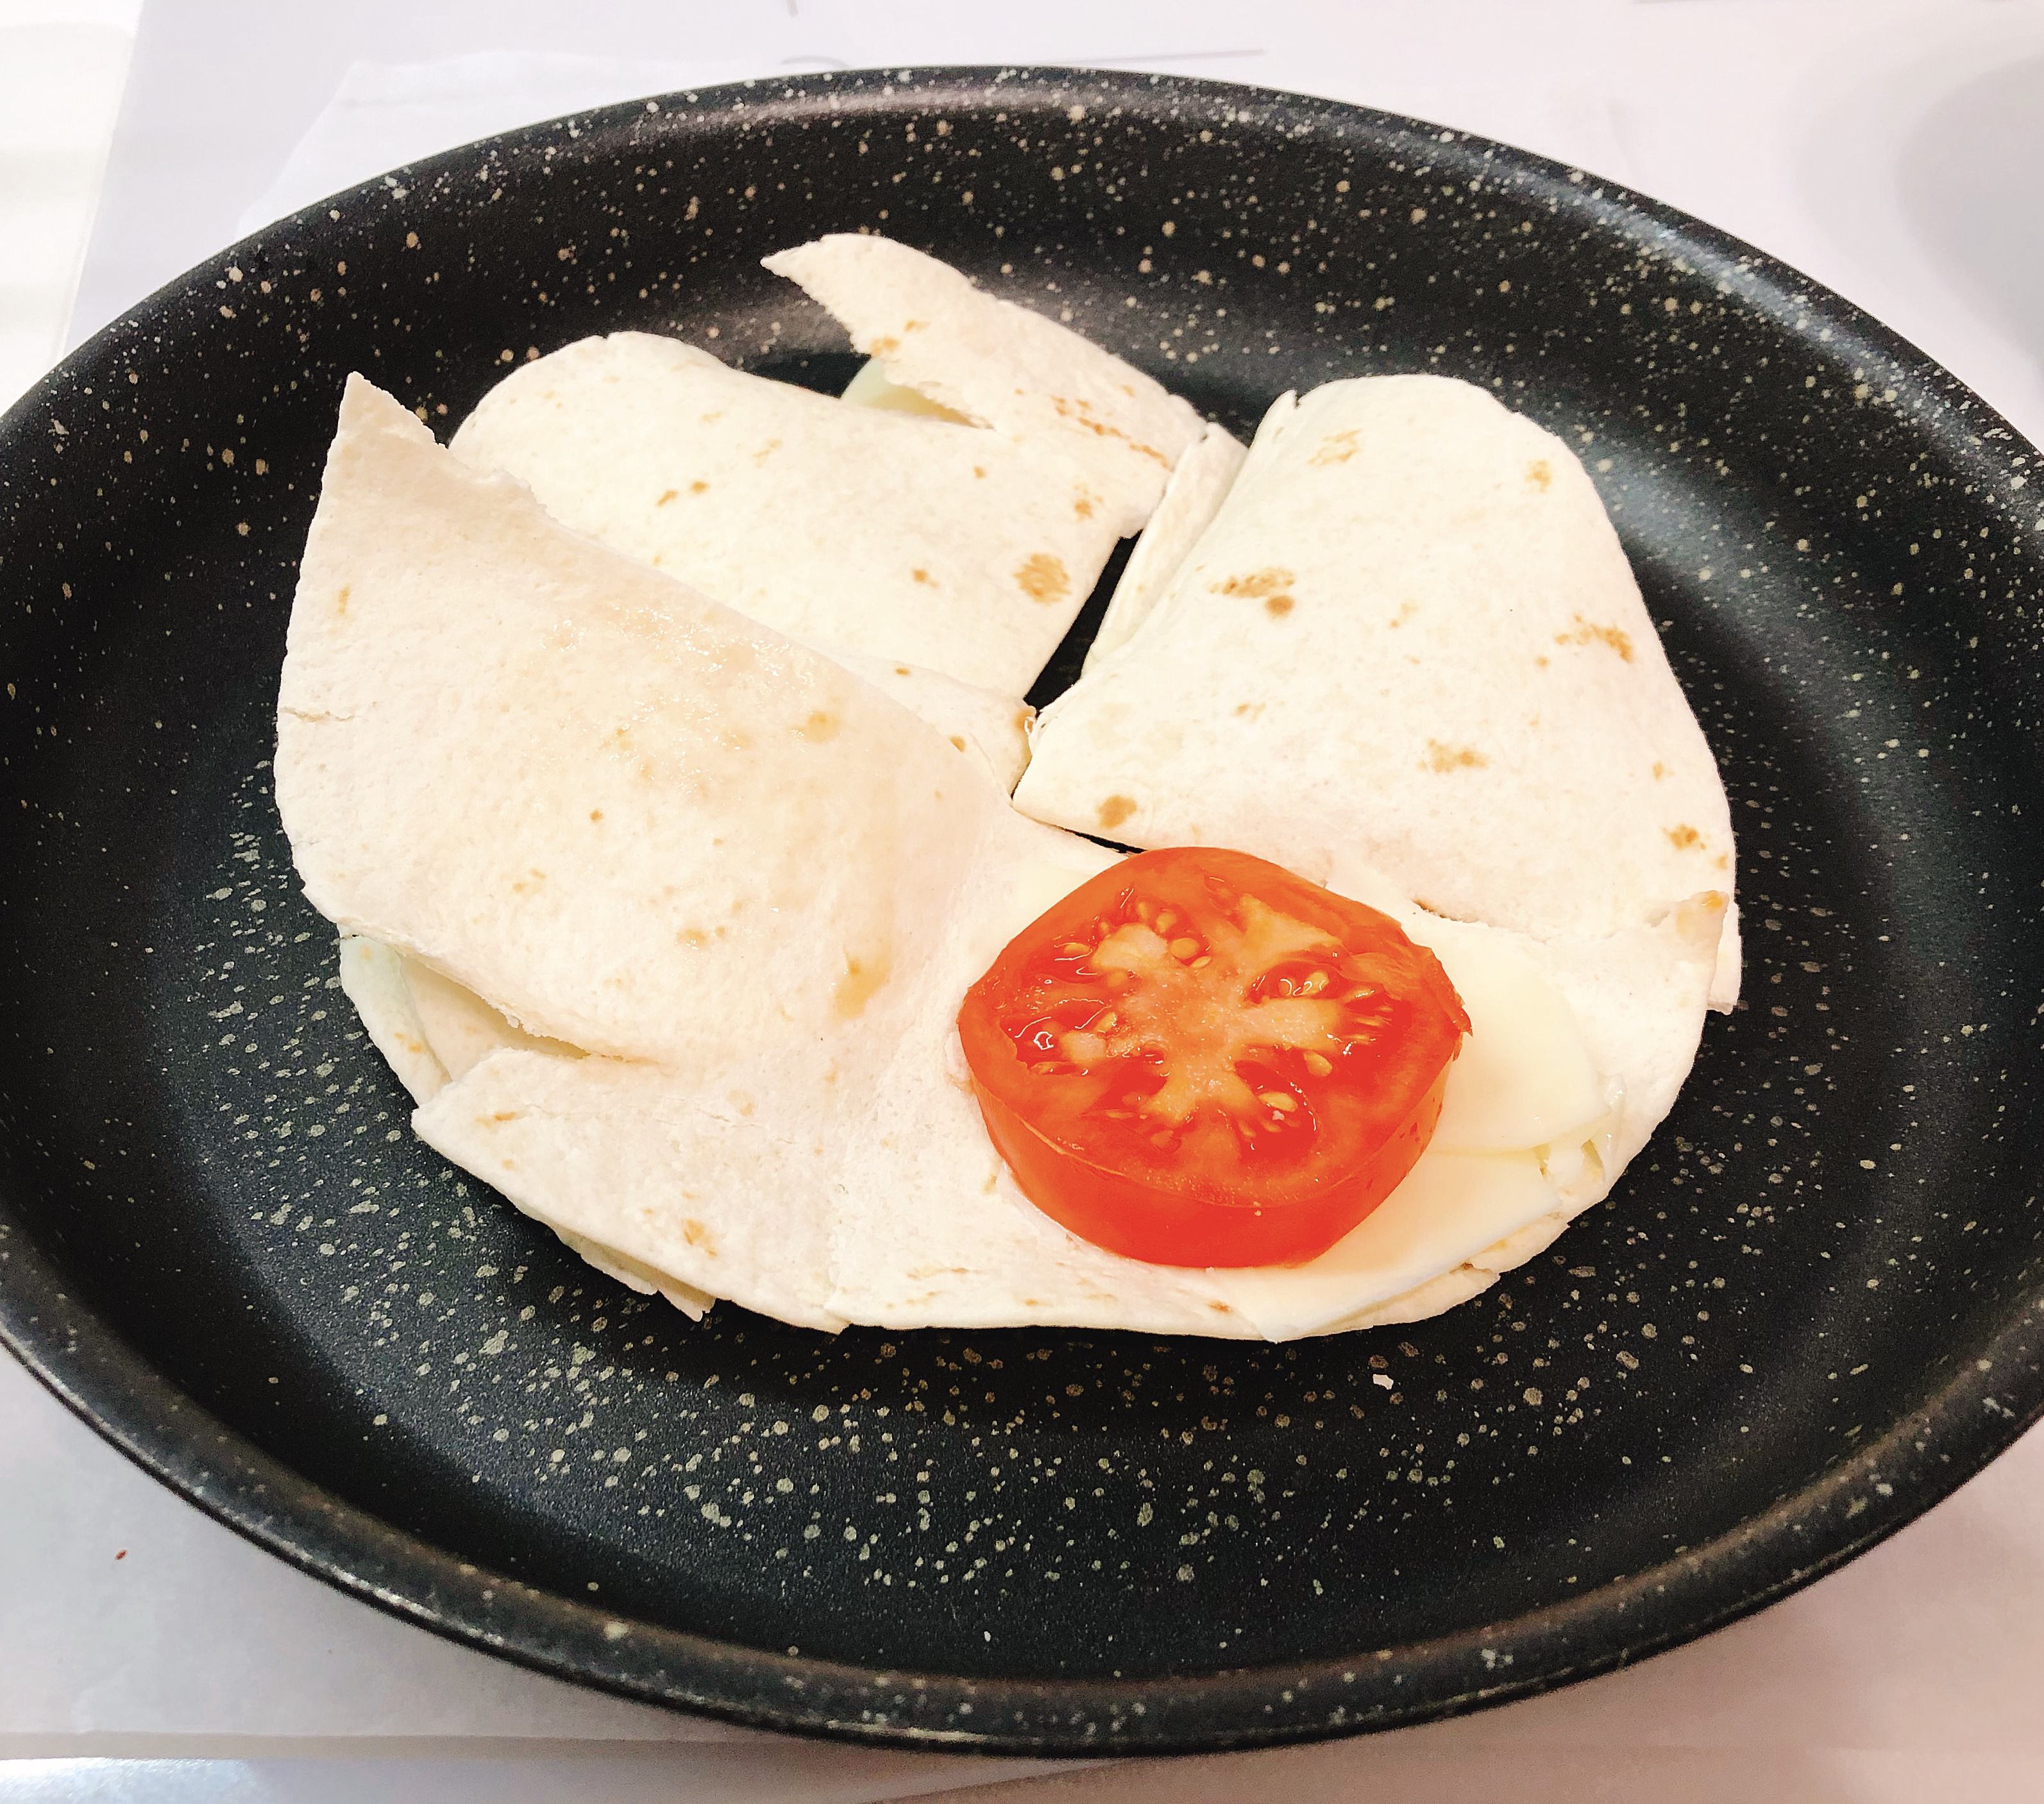 Fried tortilla with tomatoes